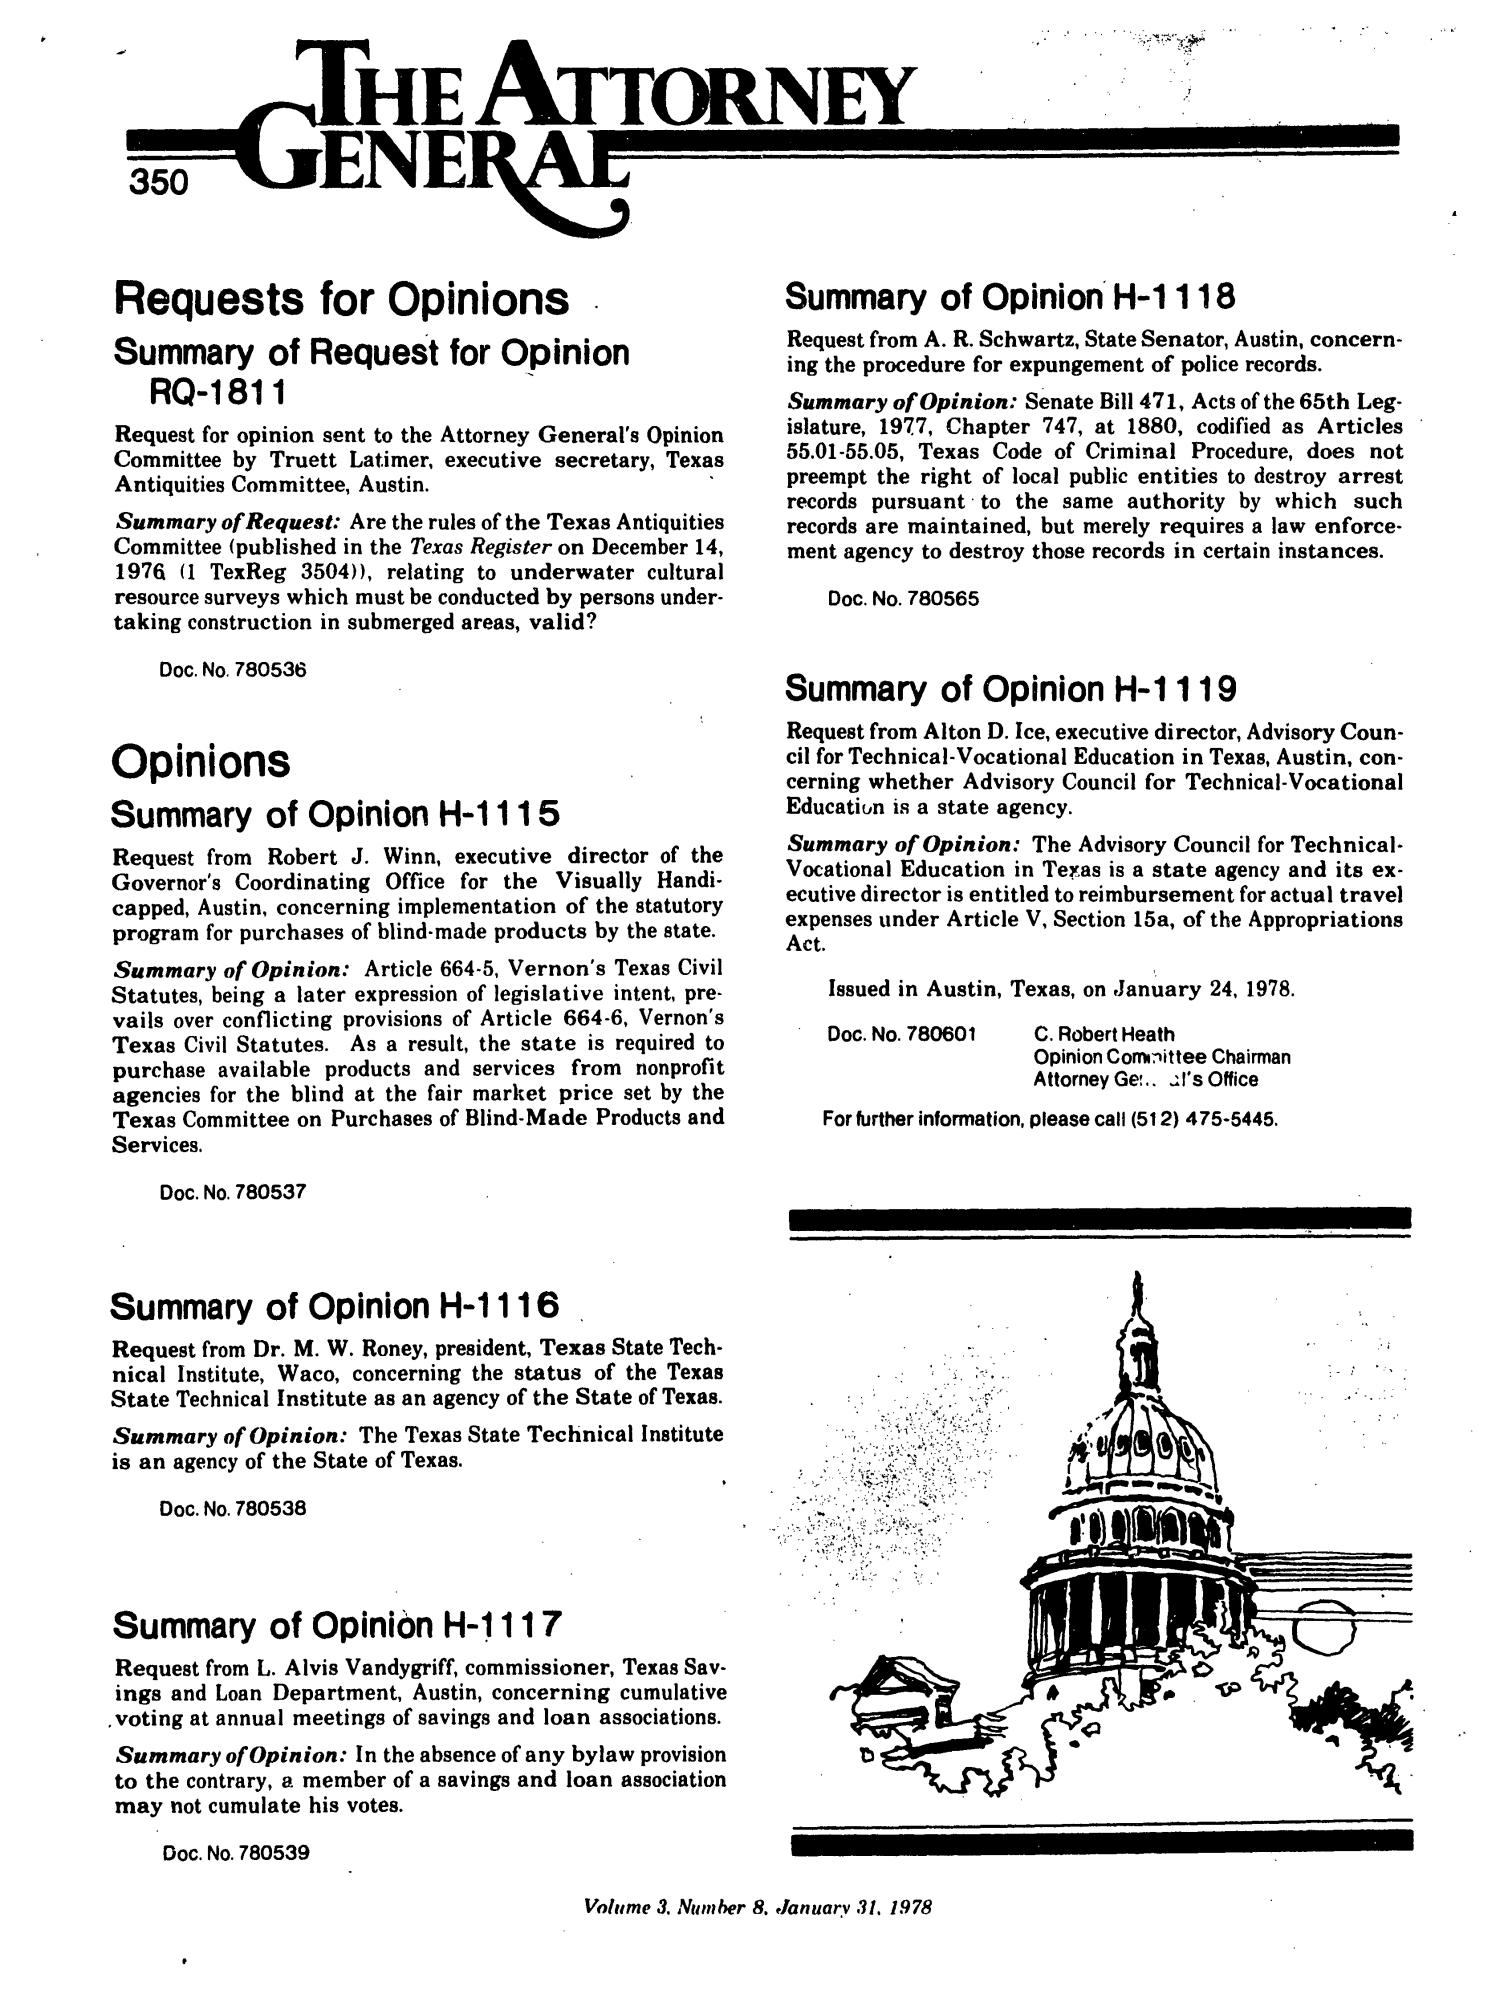 Texas Register, Volume 3, Number 8, Pages 345-413, January 31, 1978
                                                
                                                    350
                                                